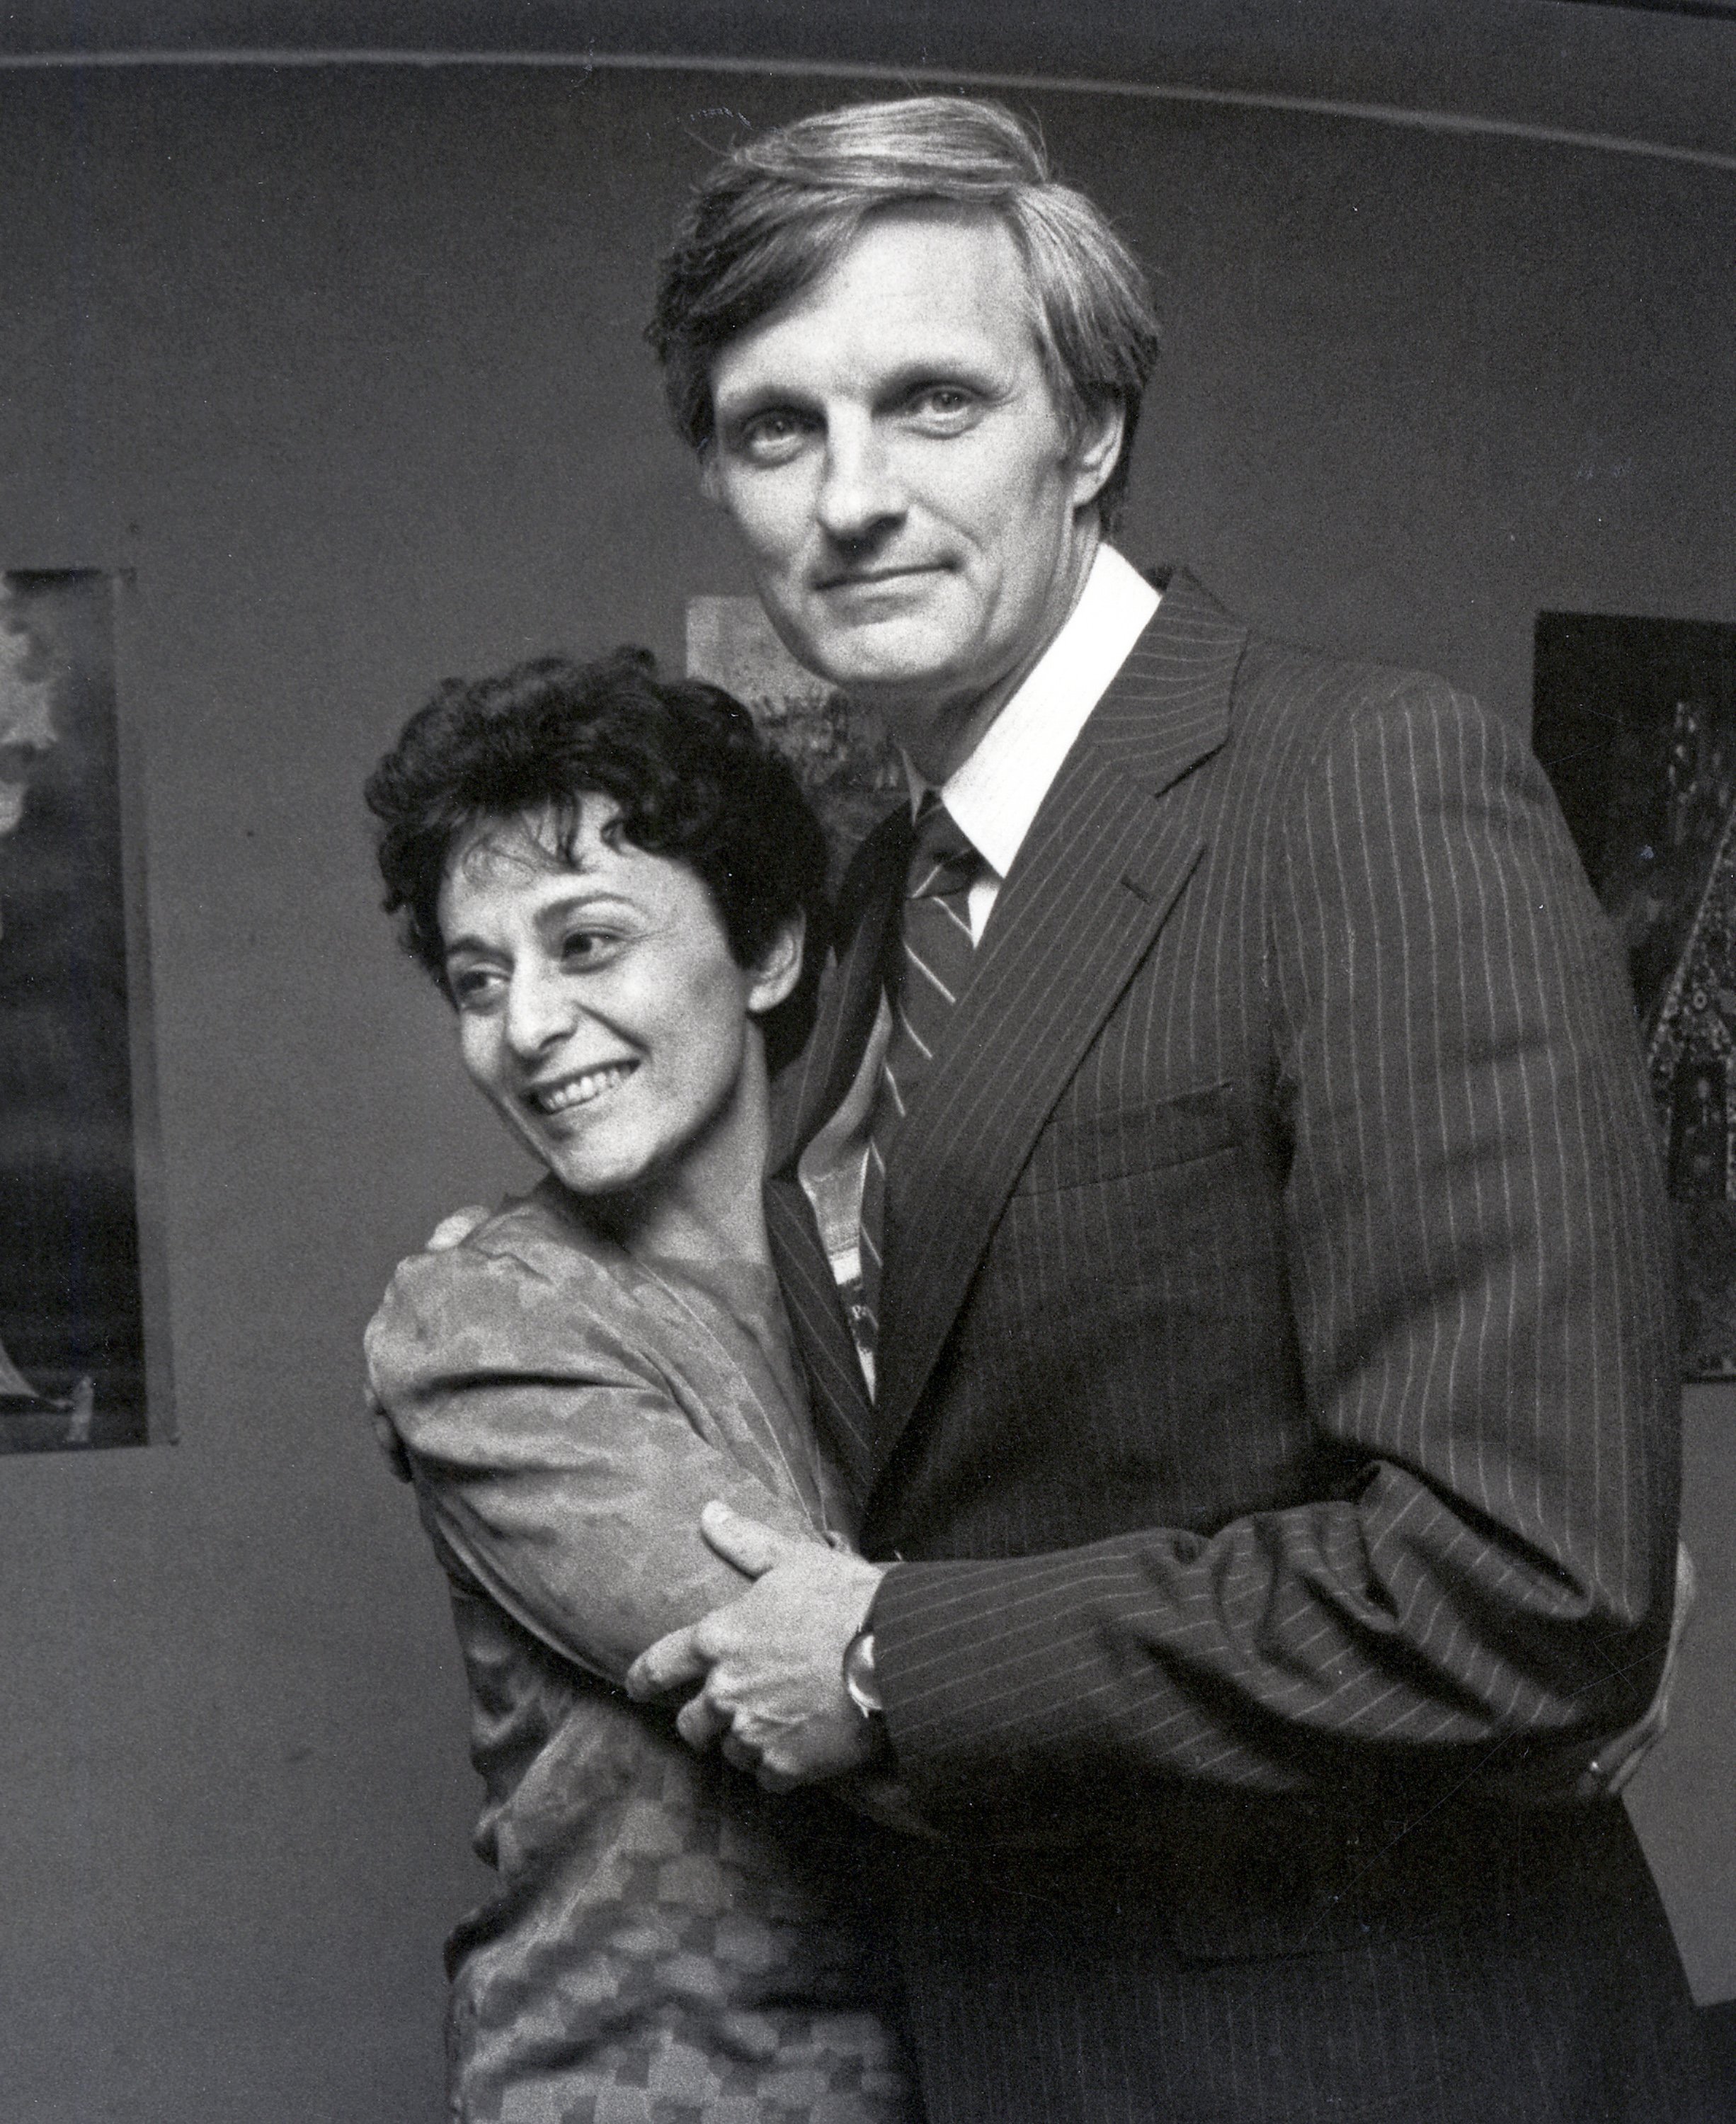 Musician Arlene Alda and her husband actor Alan Alda during "The Four Seasons" New York Premiere Press Party at Lincoln Center Library in New York City, New York ┃Source: Getty Images